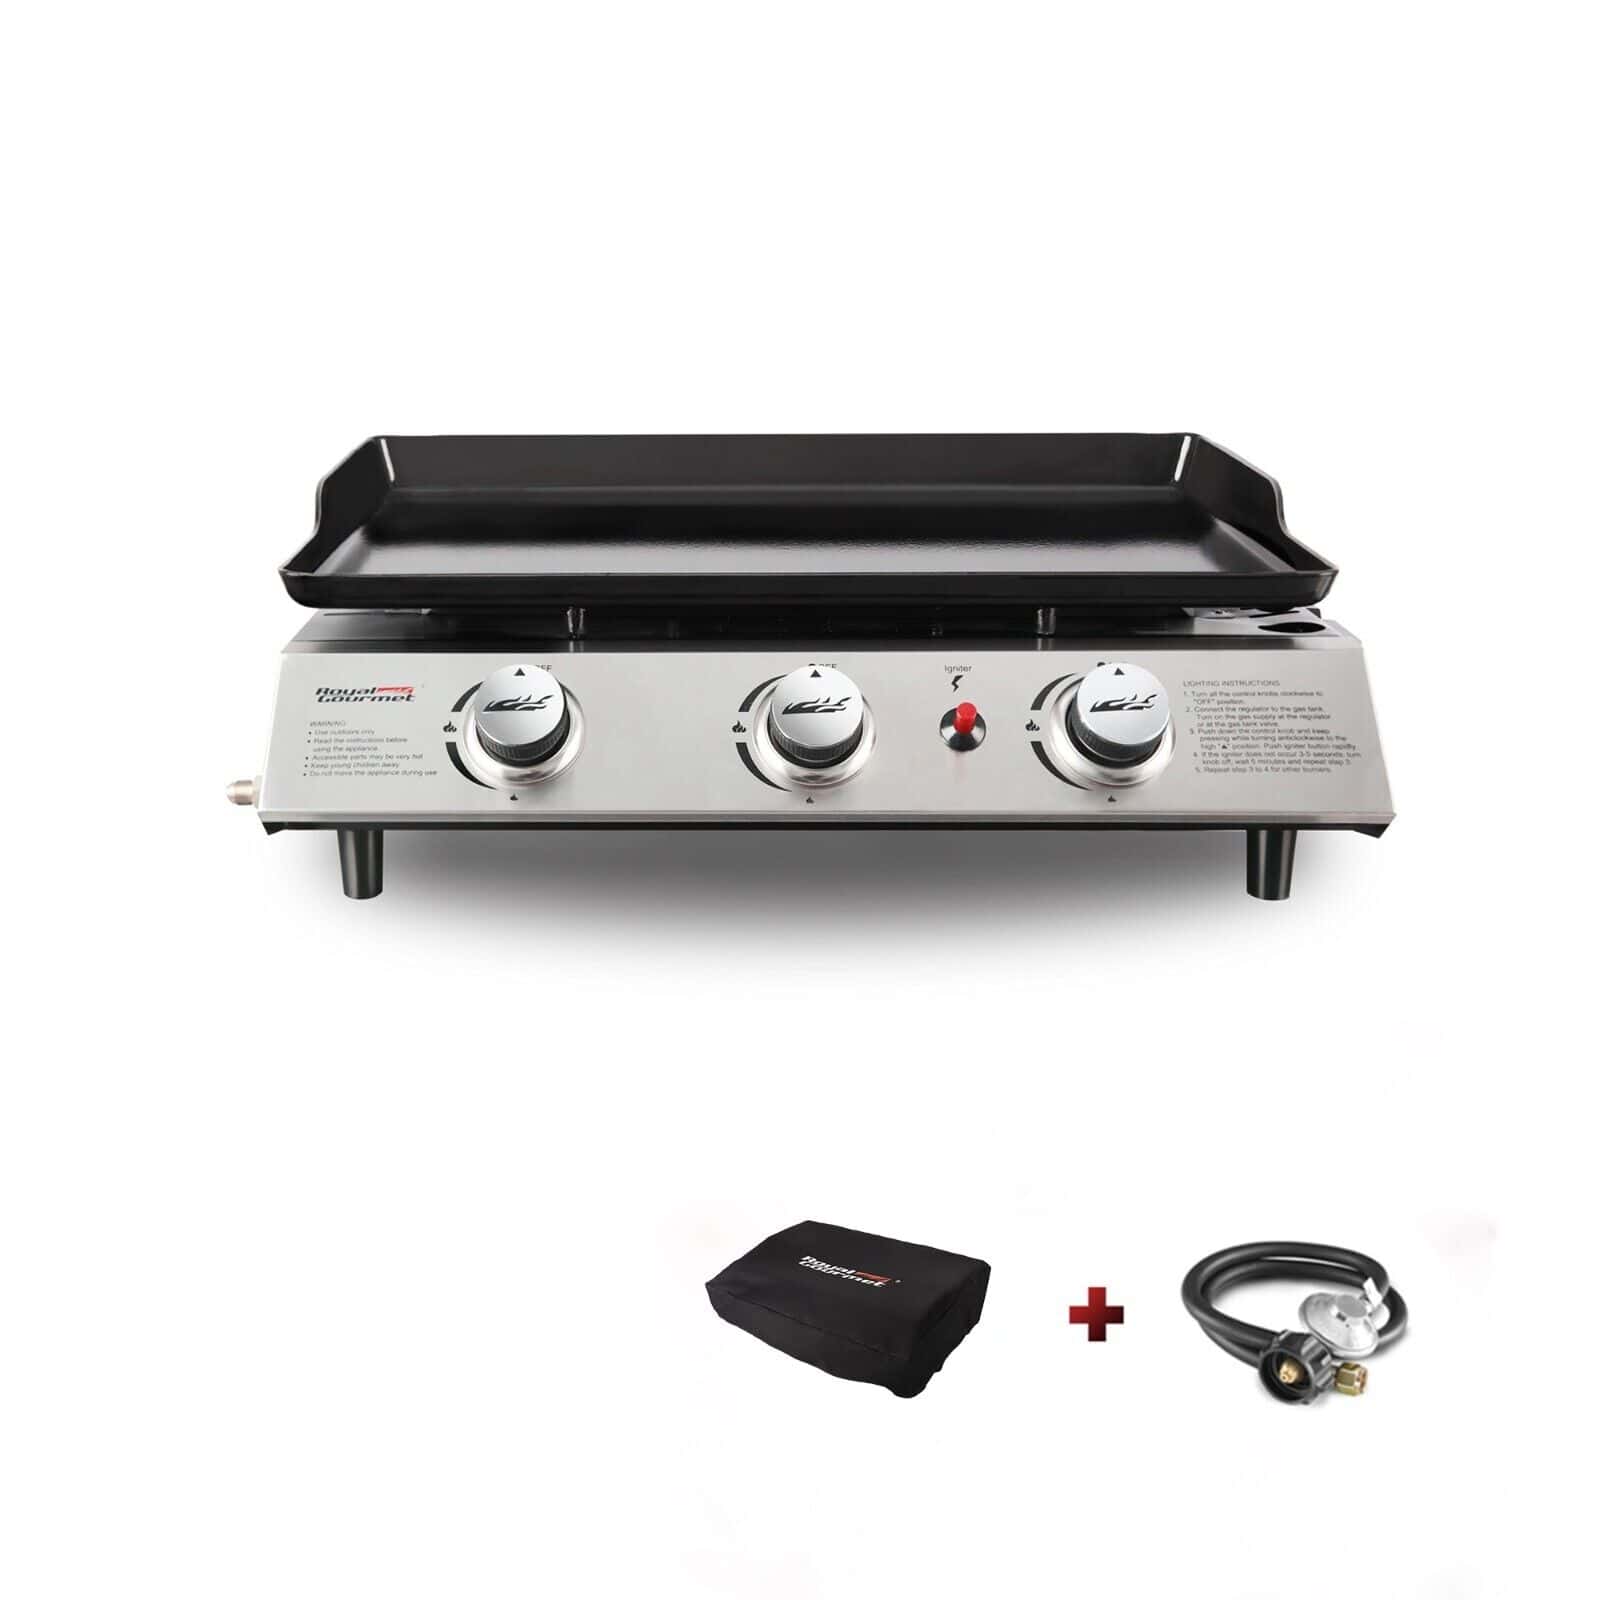 A gas grill with two burners and a propane tank.